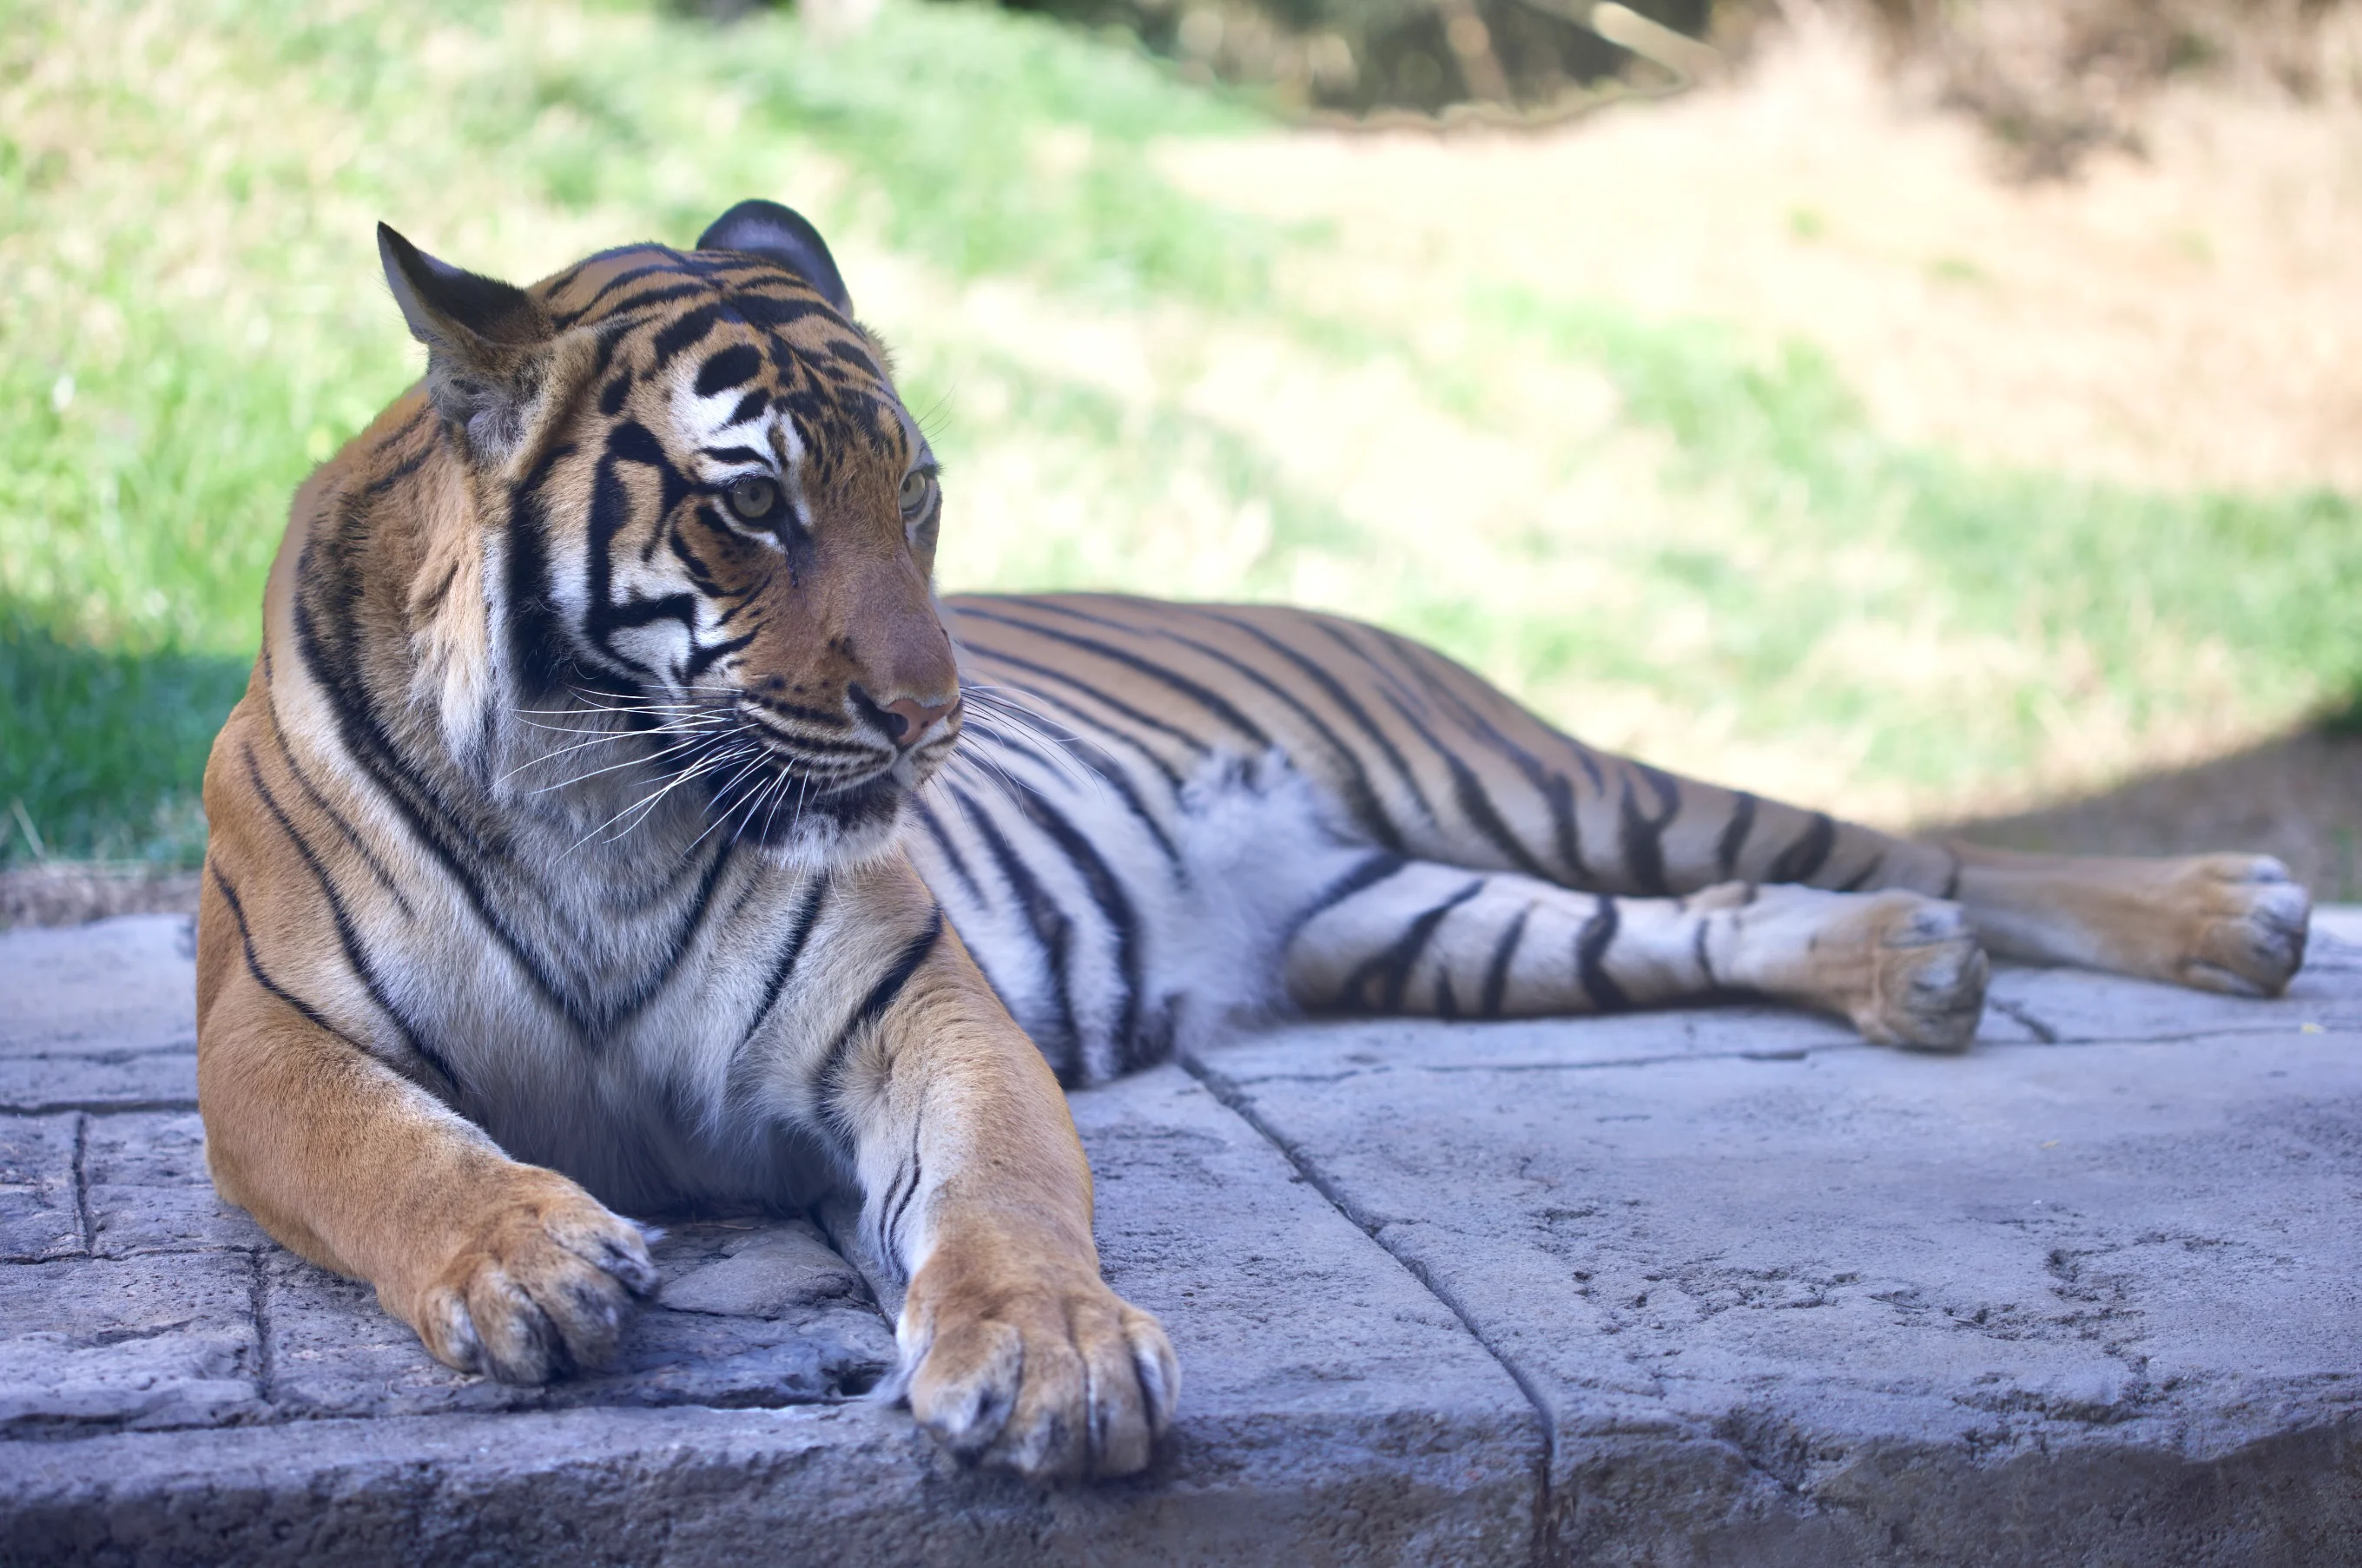 The Royal Bengal Tiger streaming: where to watch online?